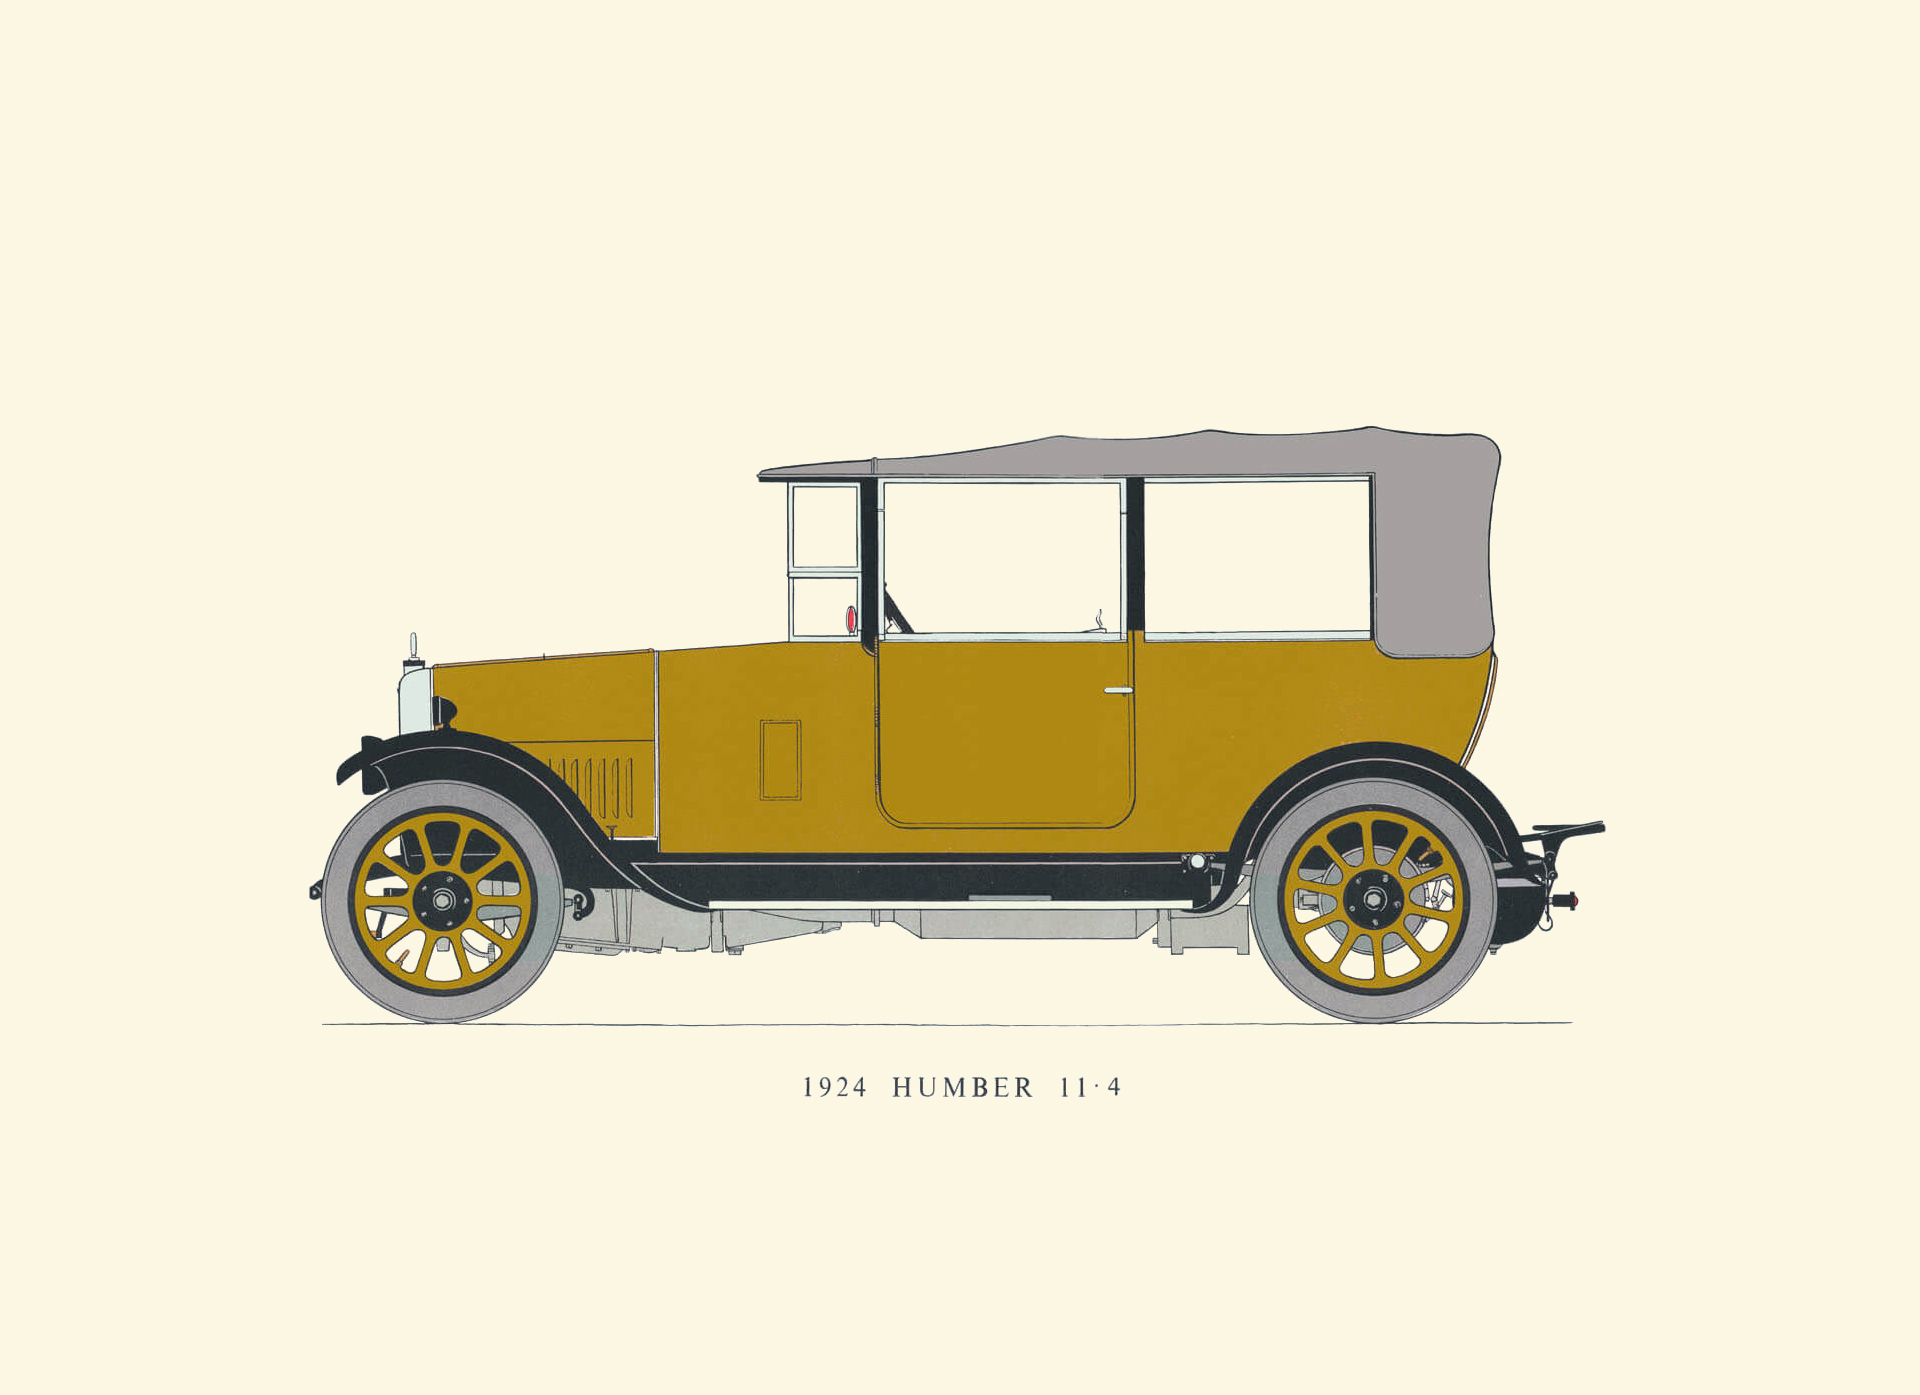 1924 Humber 11·4 All-Weather body by Humber Limited, Coventry, England: Drawn by George Oliver